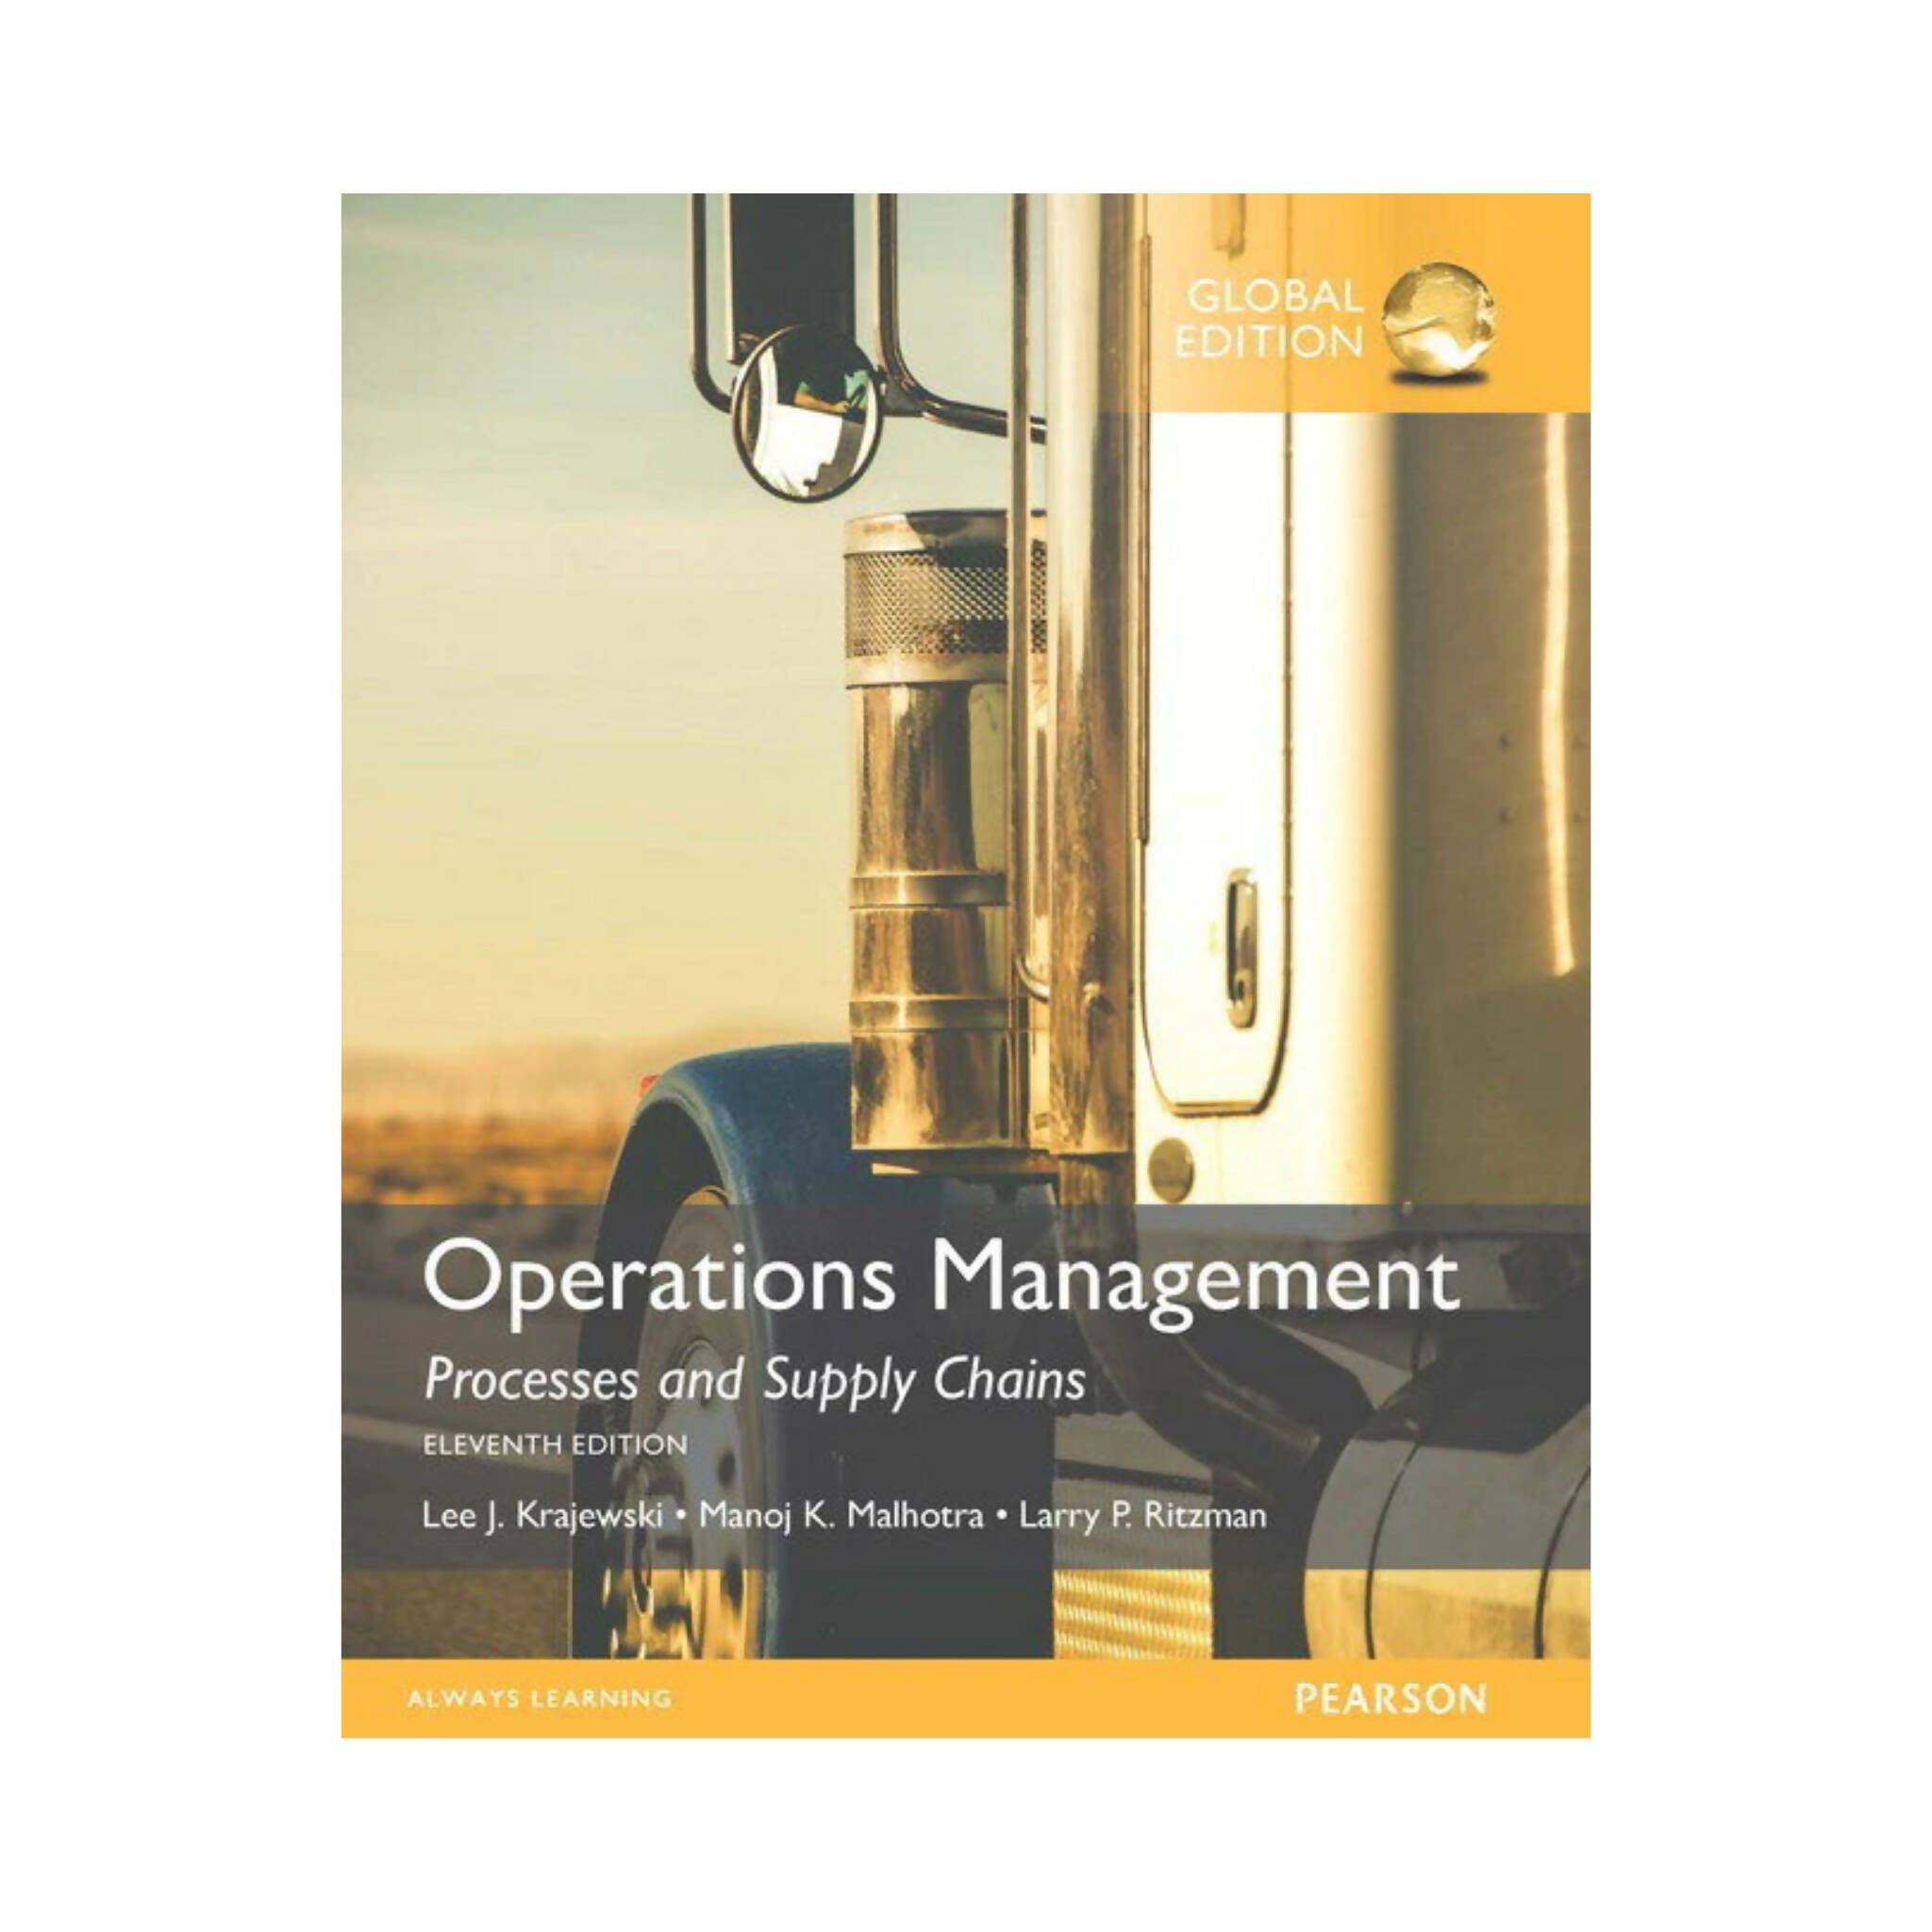 Book, Operations Management, Processes and Supply Chains